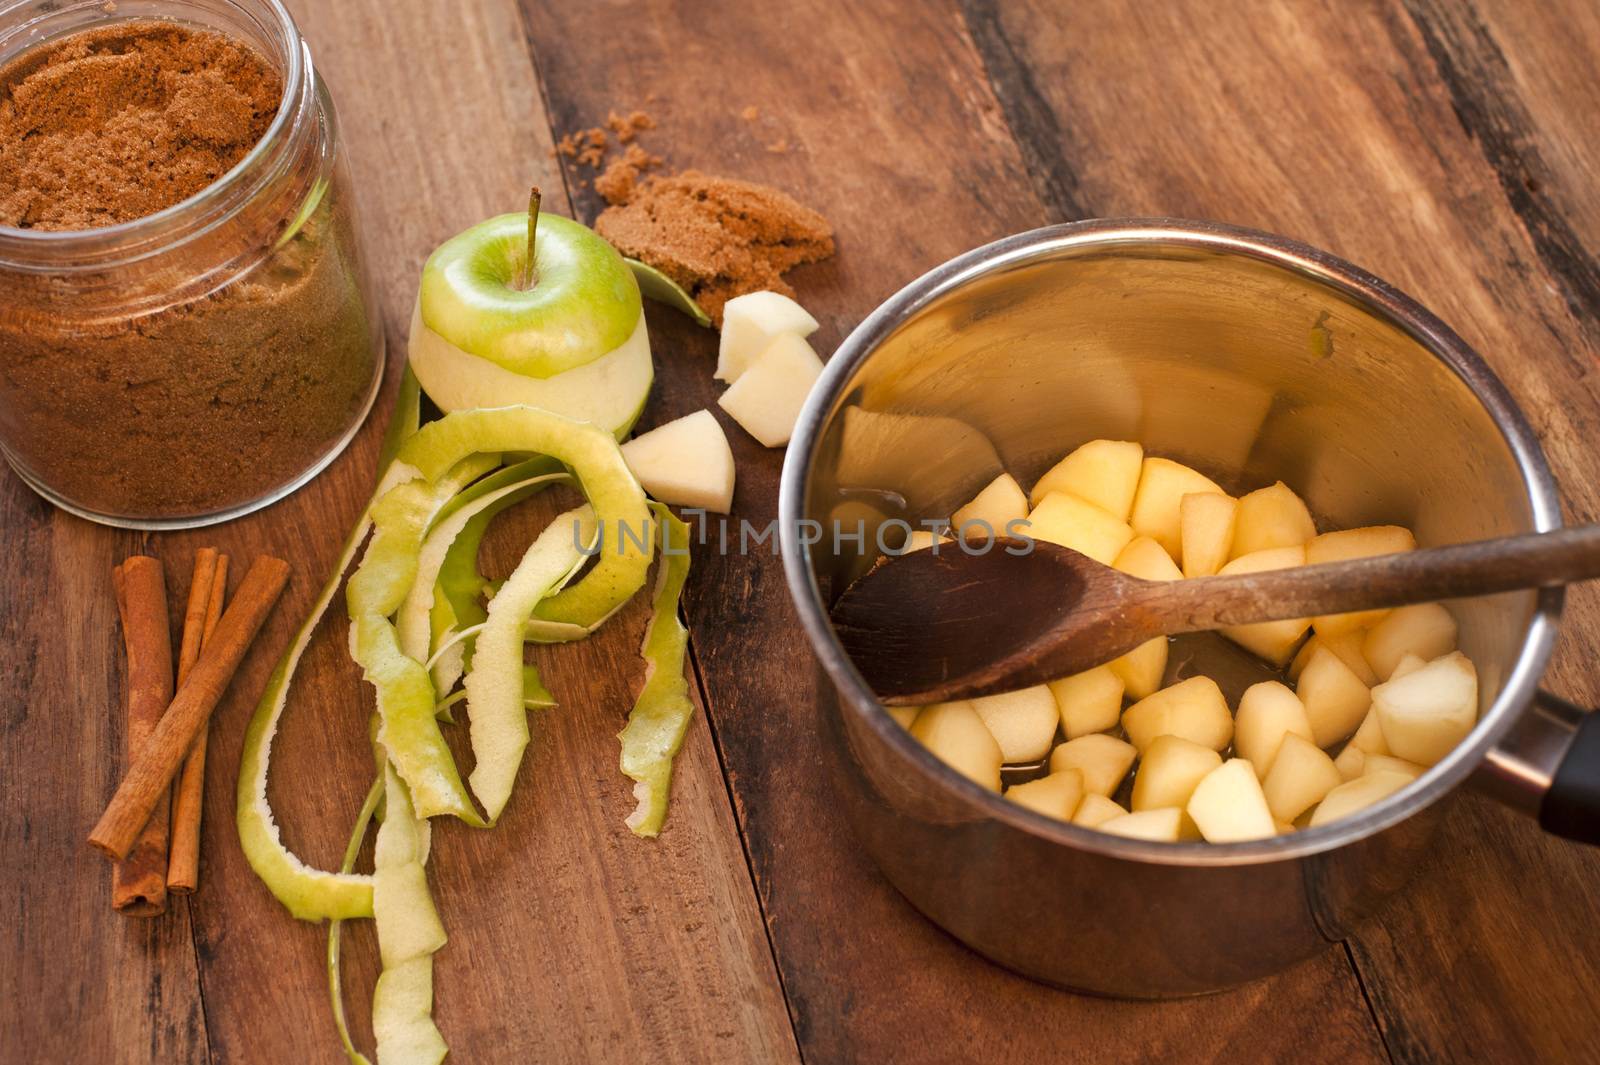 Preparing homemade apple and cinnamon sauce with fresh peeled and sliced green apples in a pot alongside stick cinnamon and ground spice on a wood table